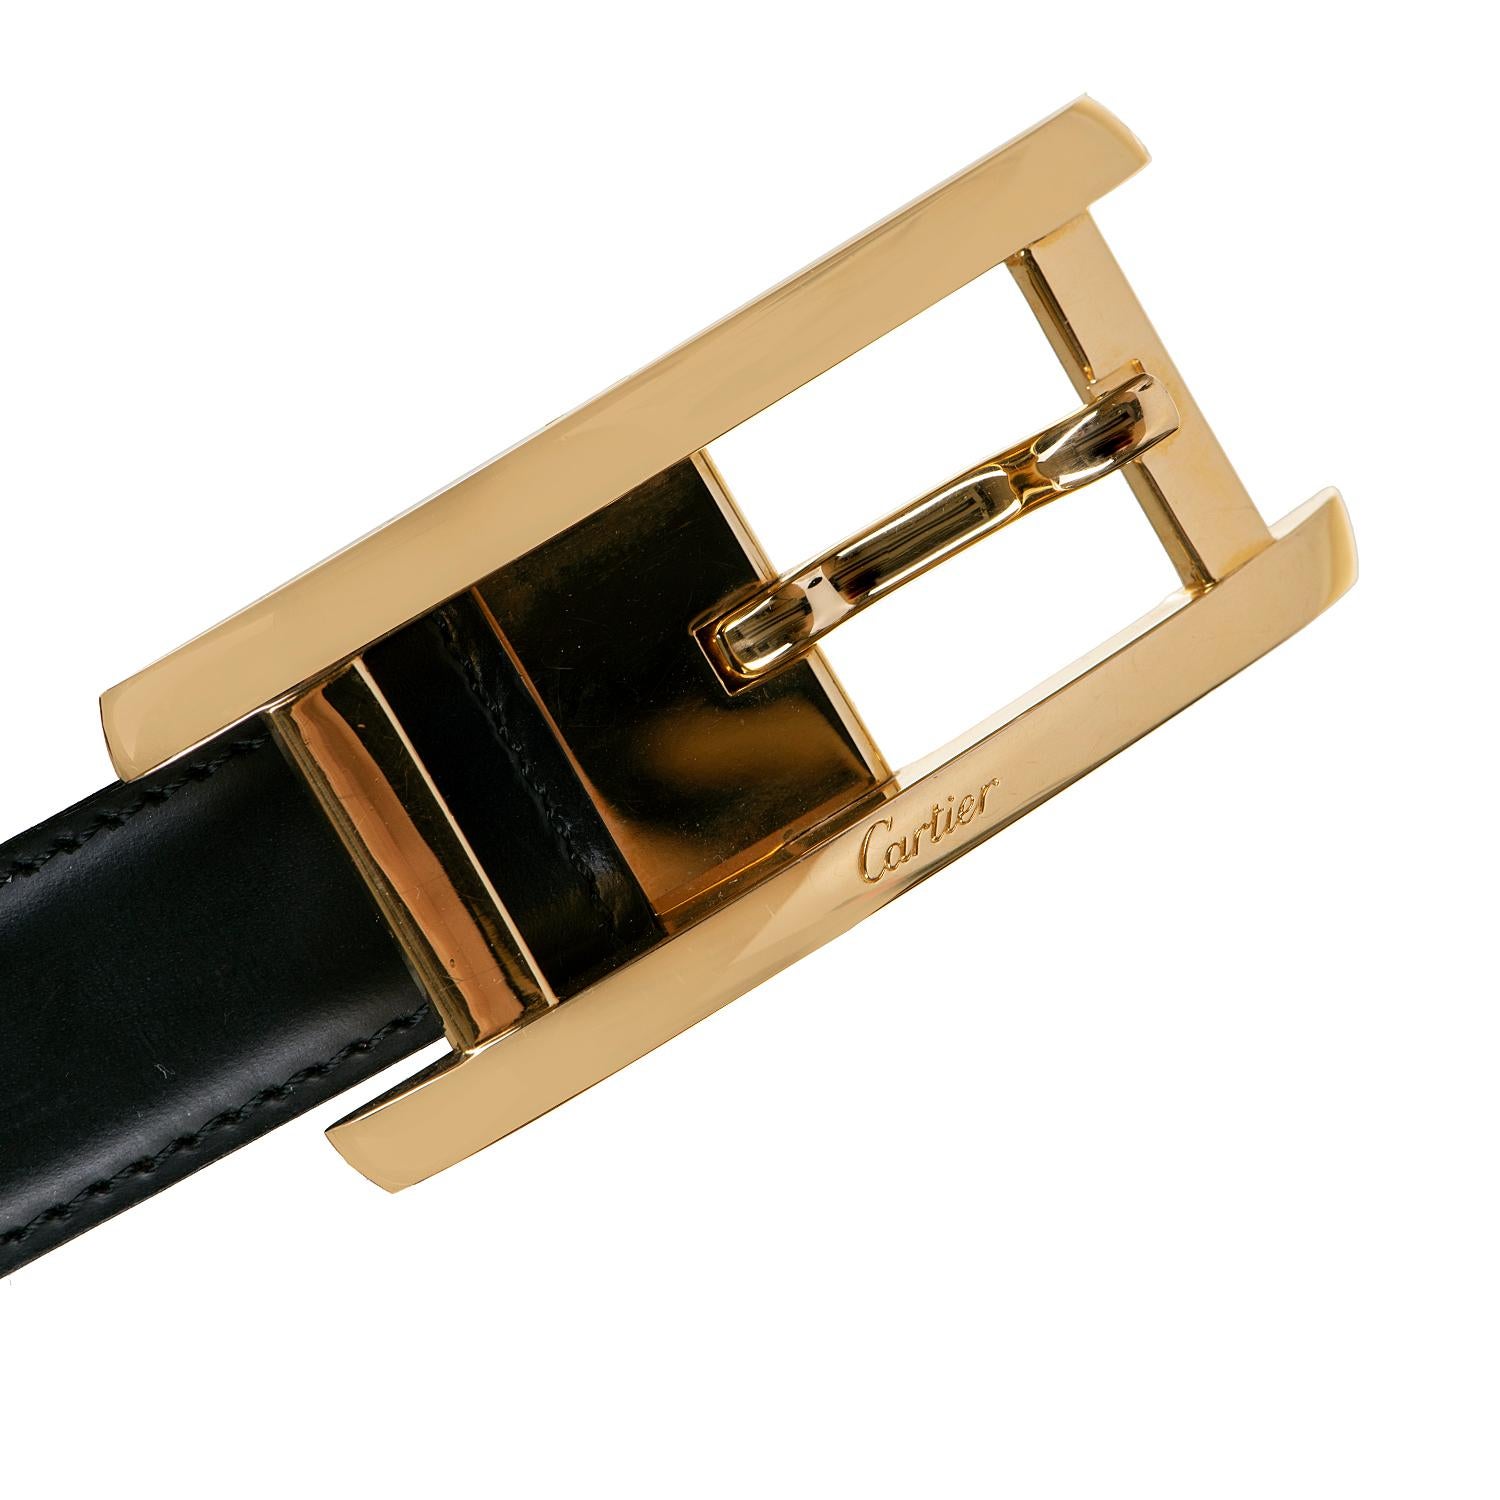 In 'As New' condition this beautifully crafted luxury belt by Cartier of Paris, is reversible, giving two colour options of black or dark brown. The gold buckle has the Cartier signature and the belt measures 35in. (89cm) long